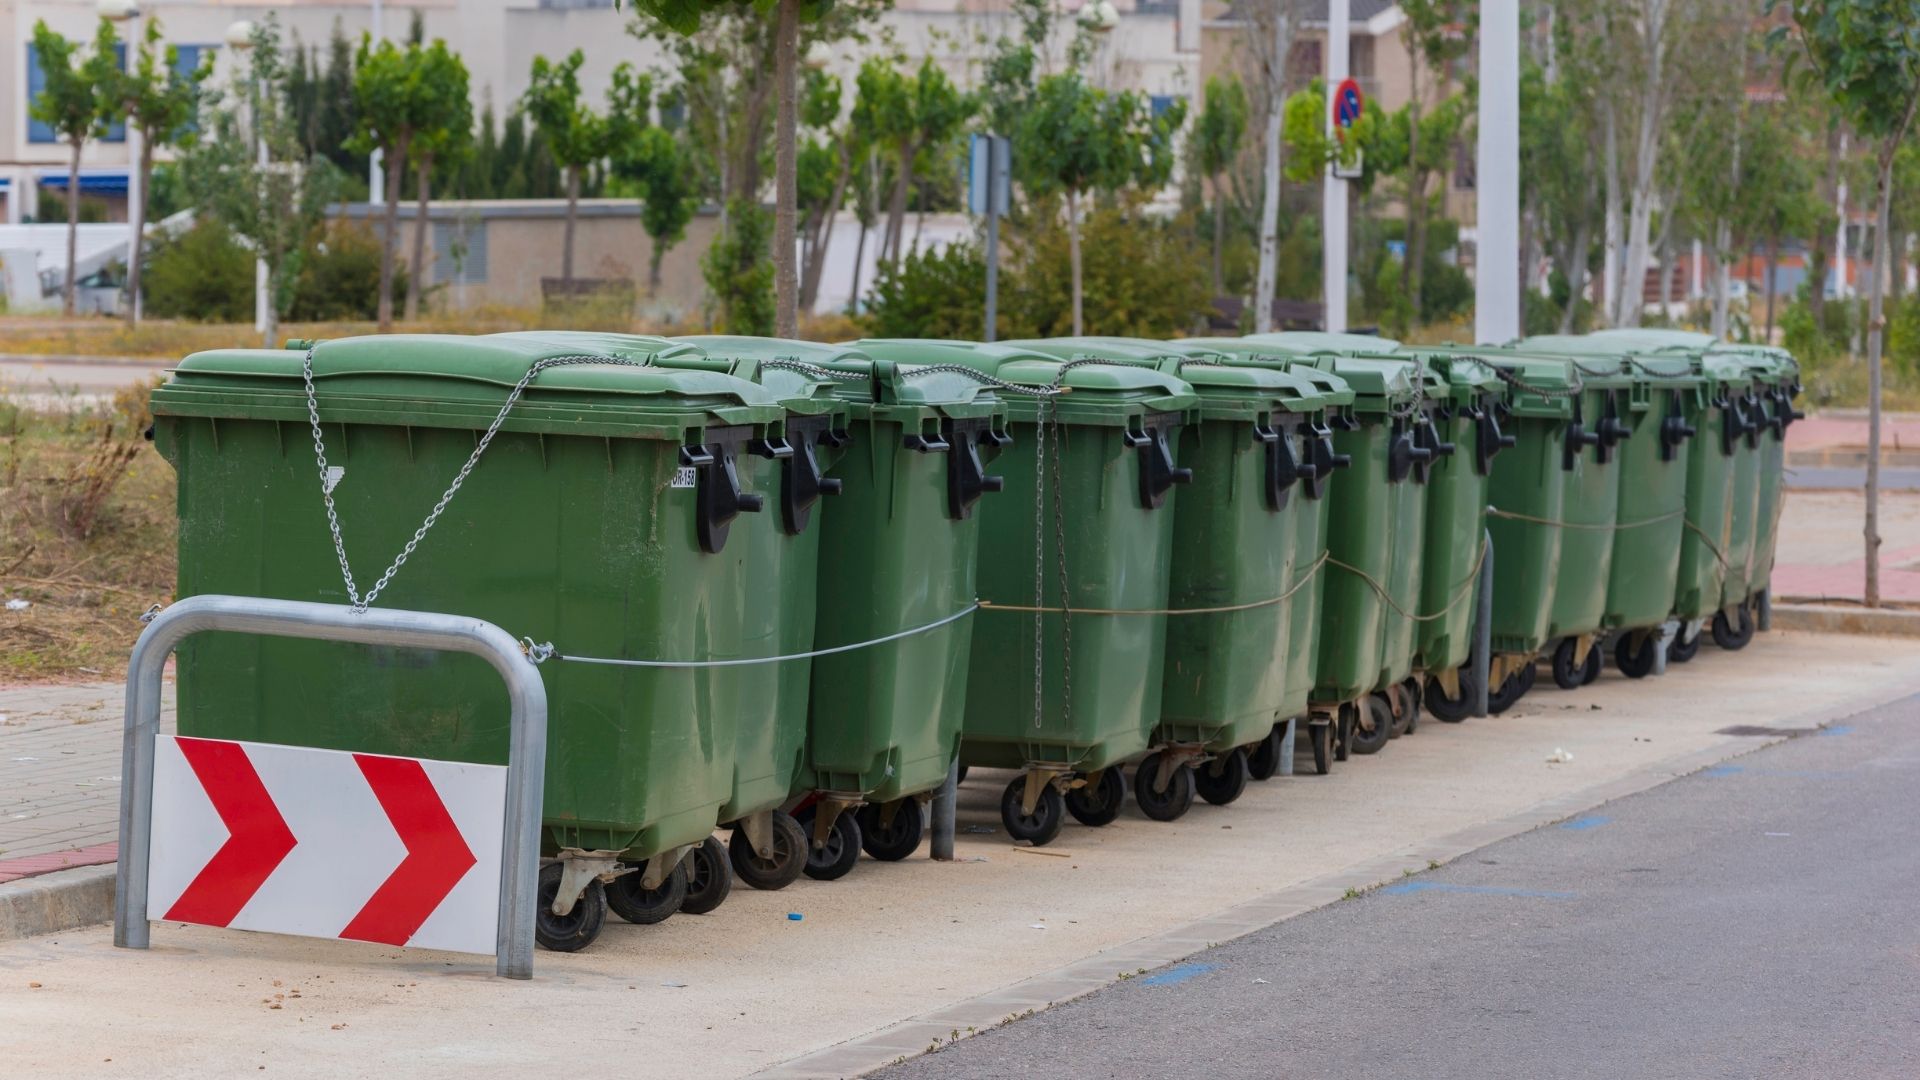 Dumpster Rental: How to Choose the Right Size for Your Sterling Project